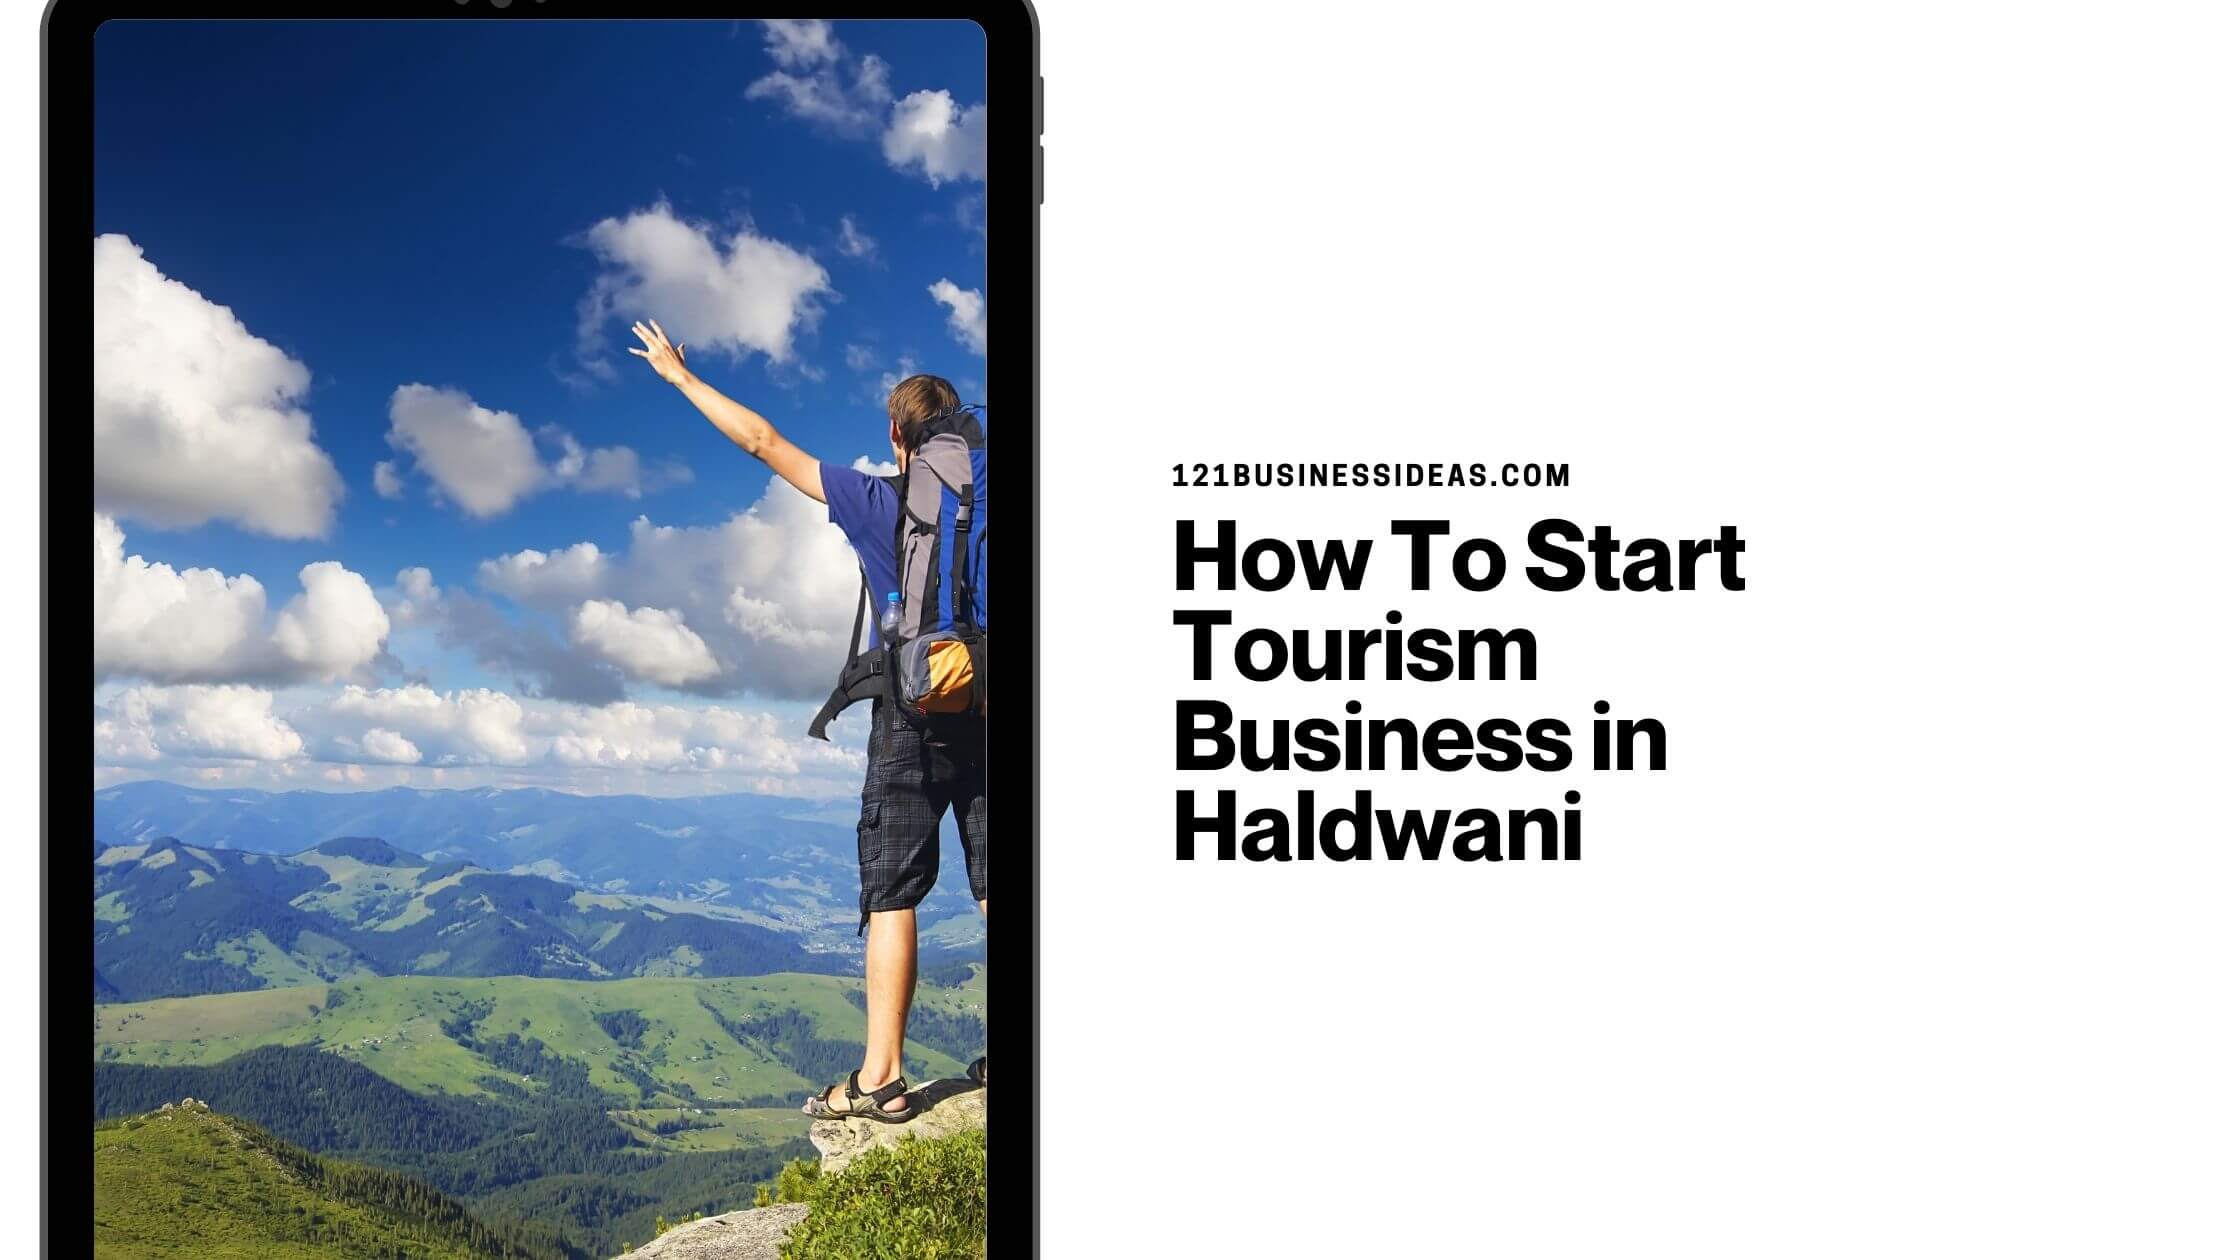 How To Start Tourism Business in Haldwani (1)